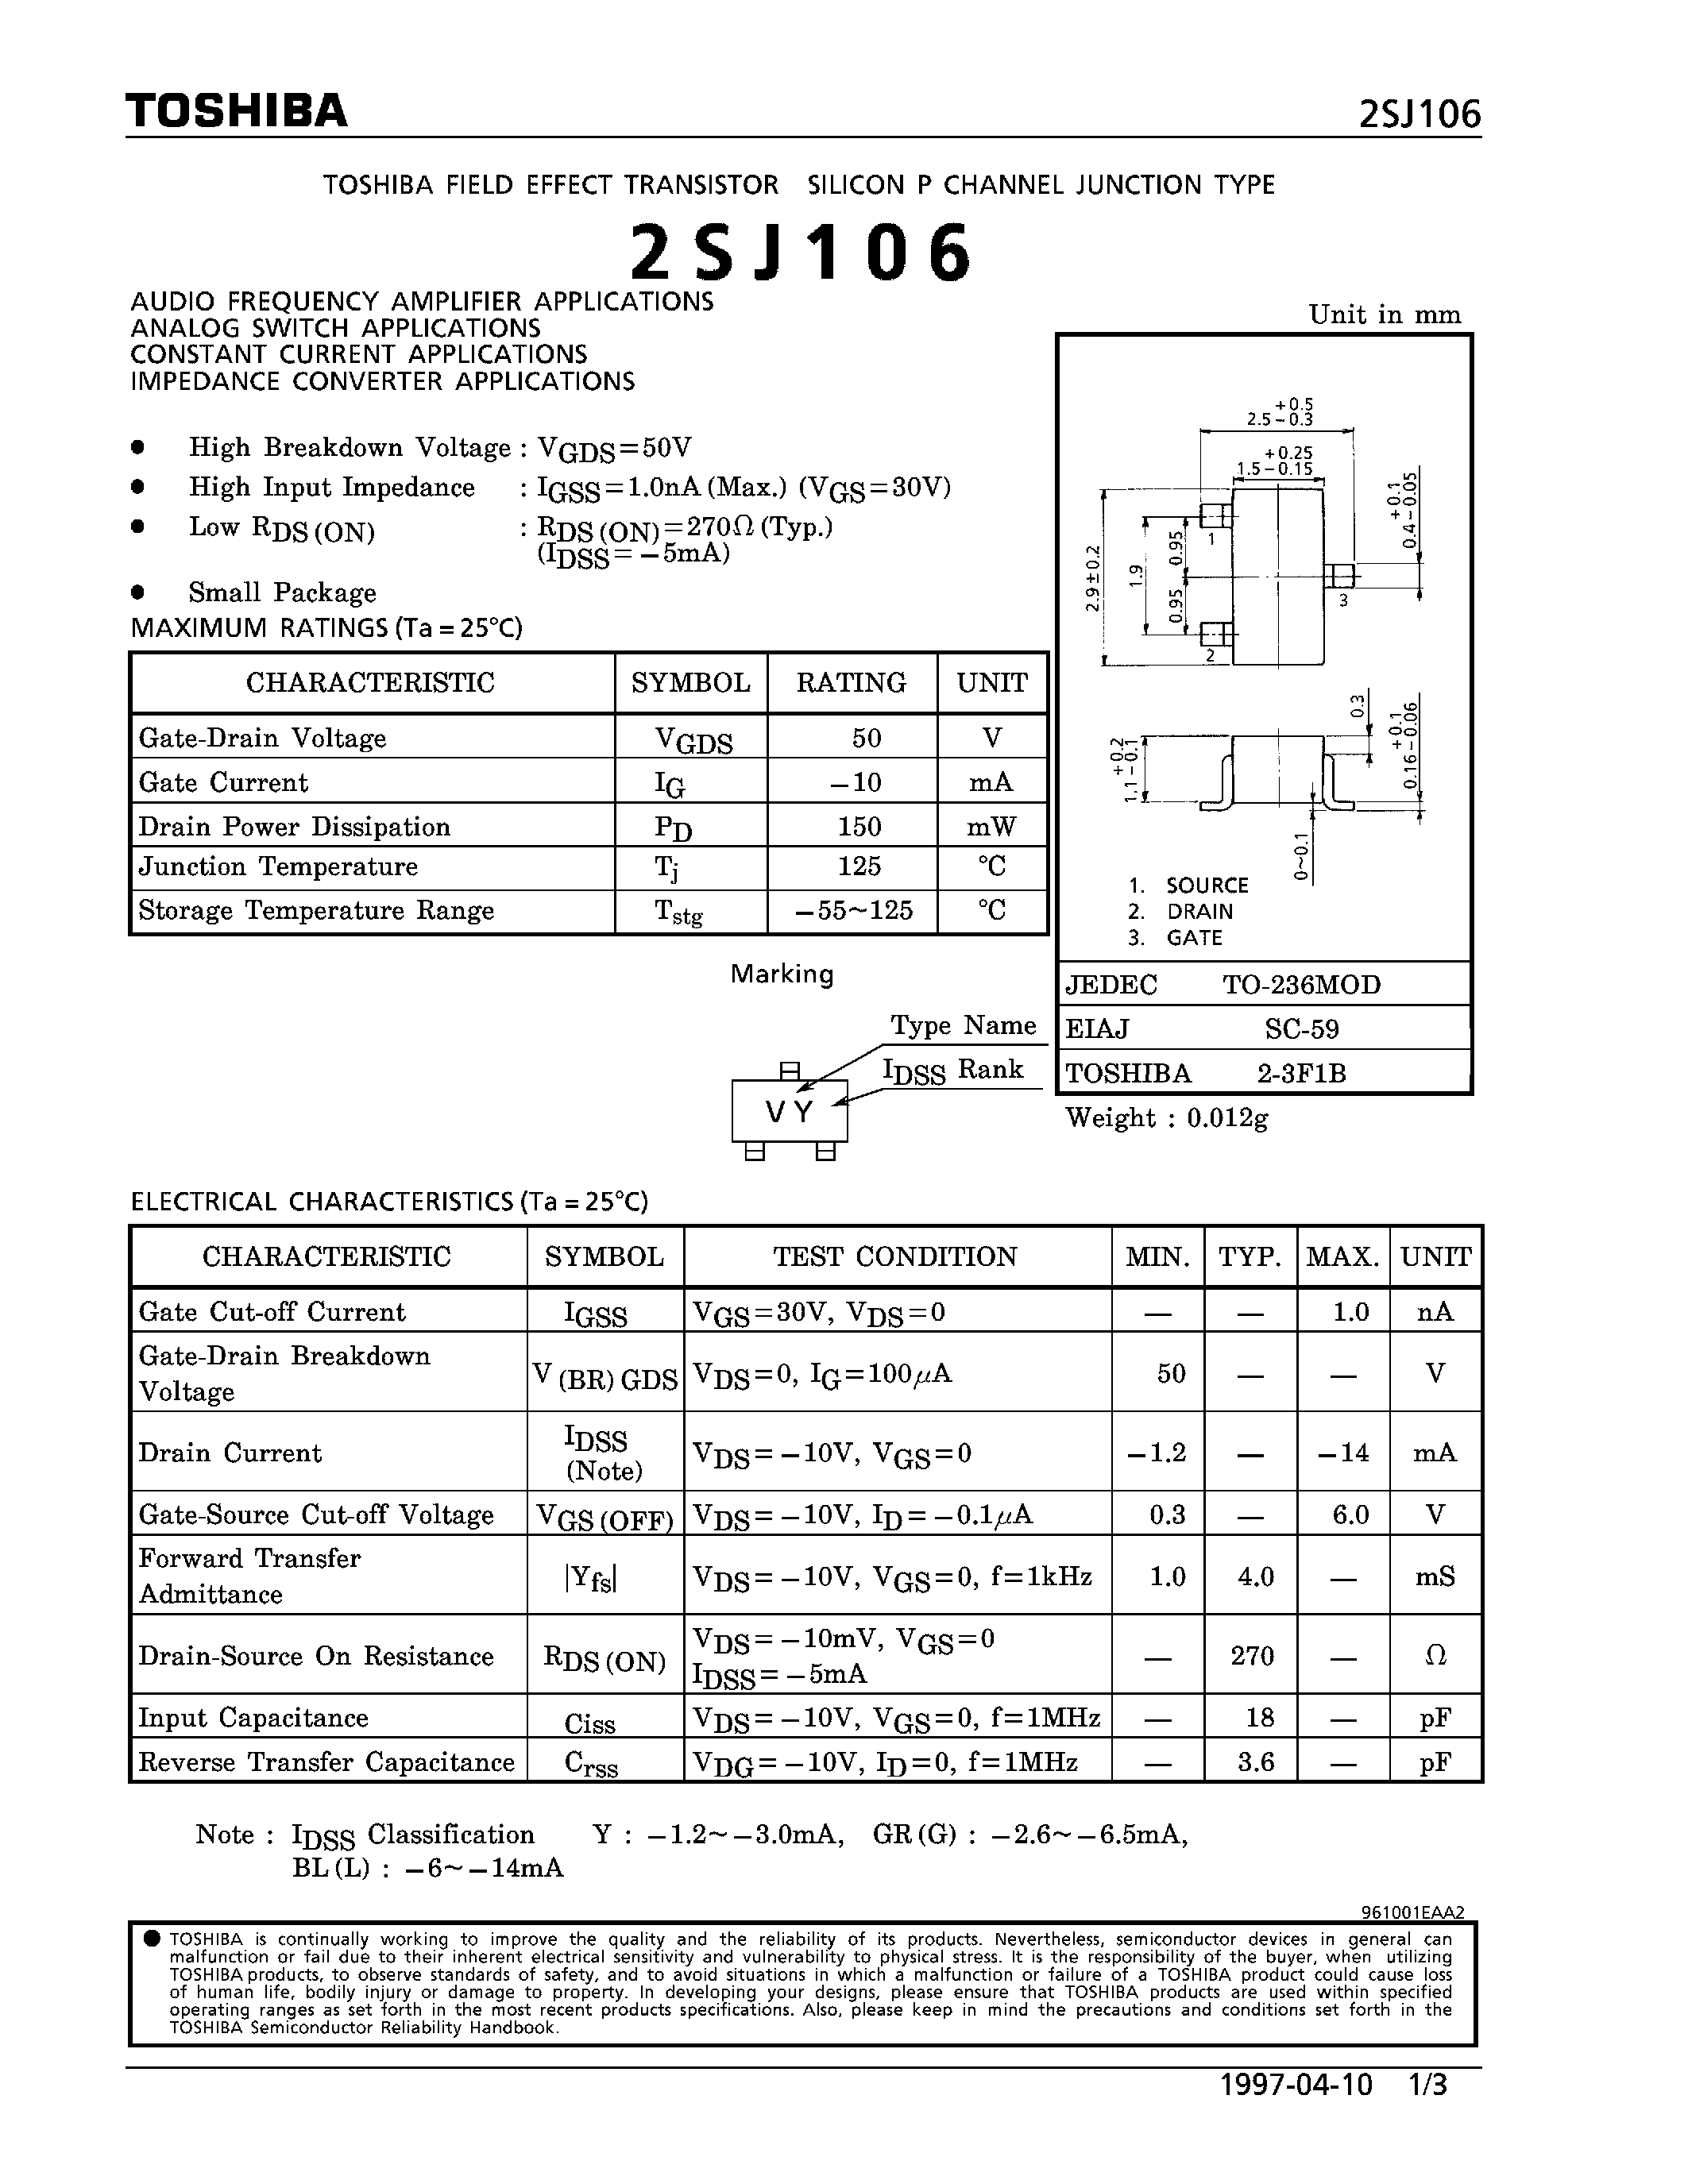 Datasheet 2SJ106 - P CHANNEL JUNCTION TYPE (AUDIO FREQUENCY AMPLIFIER APPLICATIONS) page 1